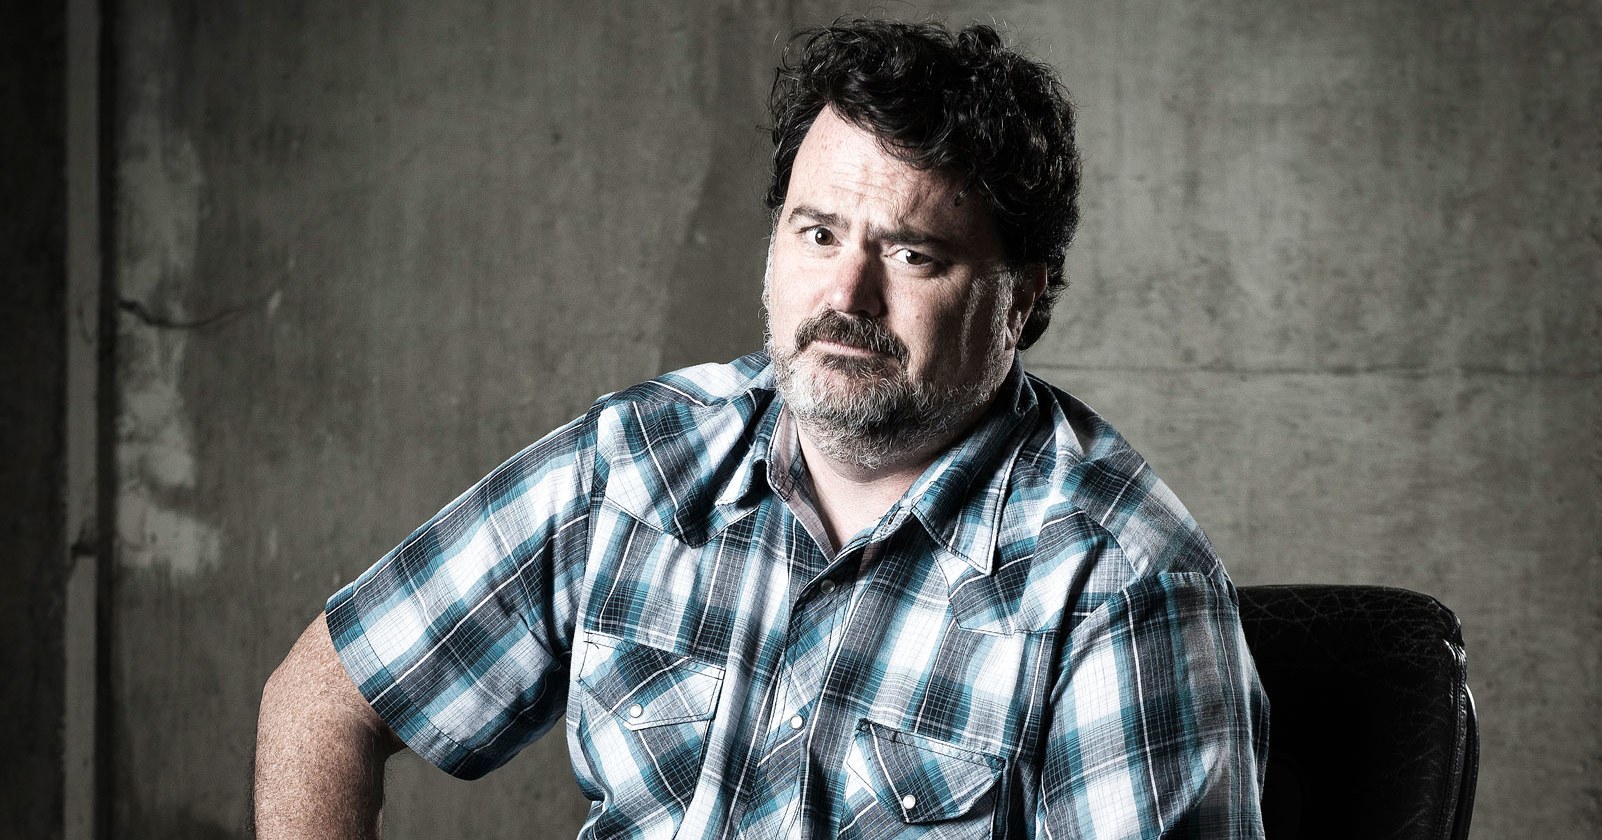 Tim Schafer will receive the Legend Award at the NYVGCC